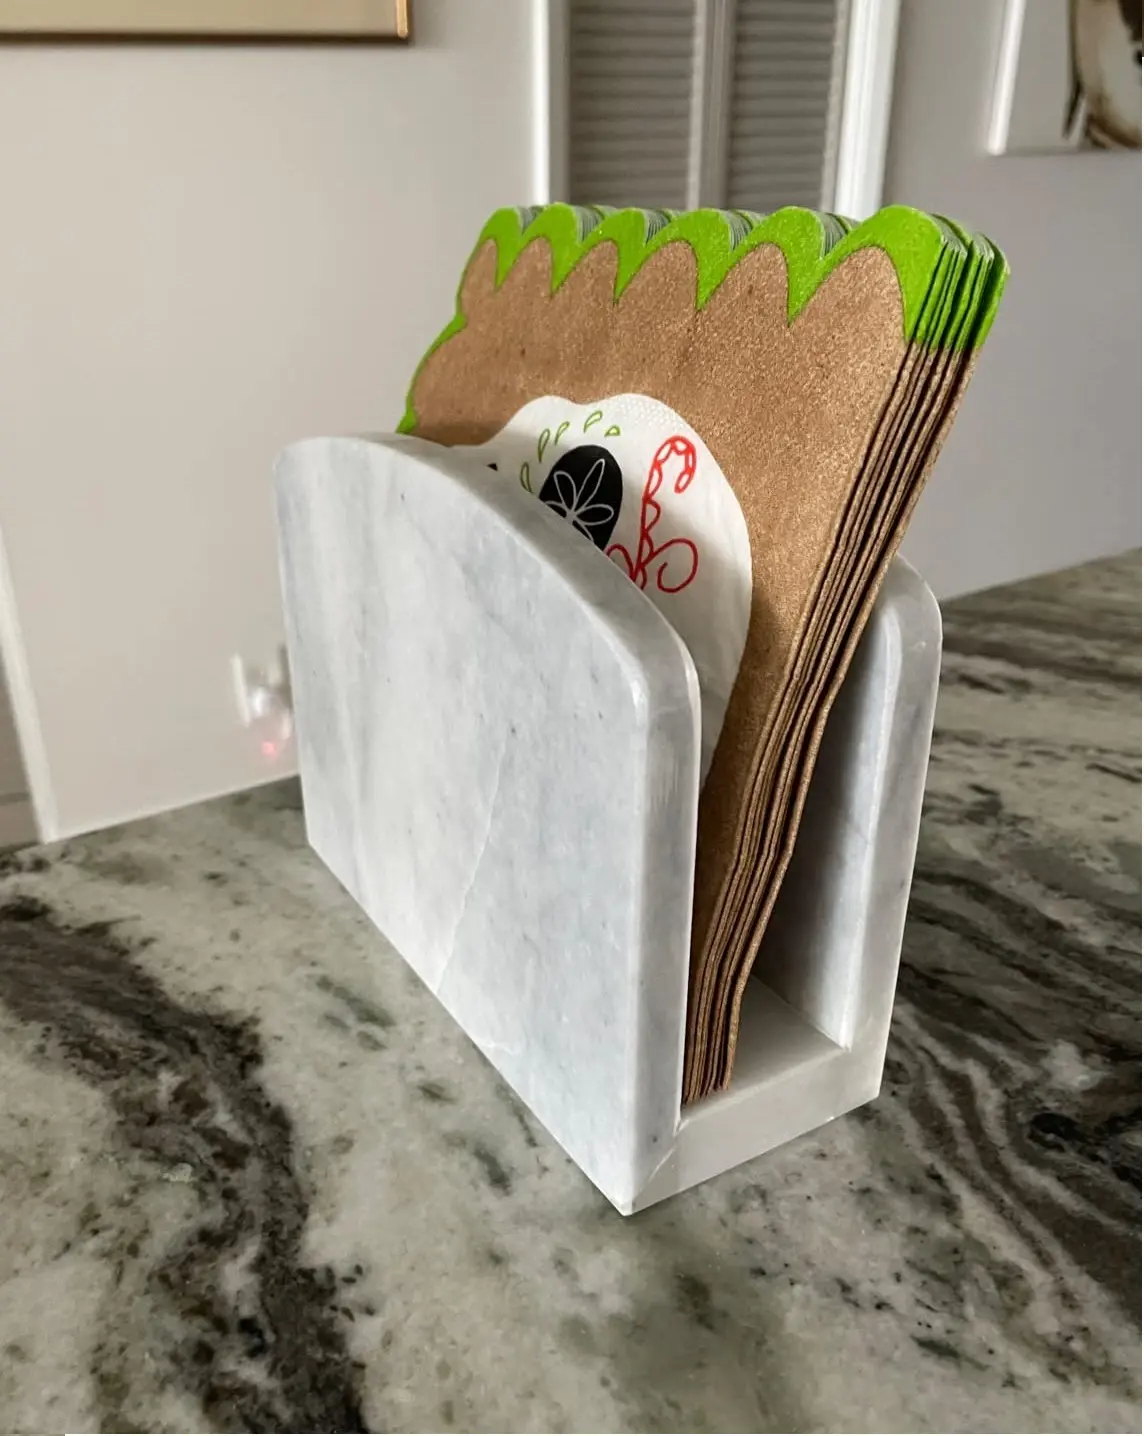 Hot sale Marble Napkin Holder Cloudy Gray 6.5"x5.5" Inch Dining Table Handmade Napkins Holder